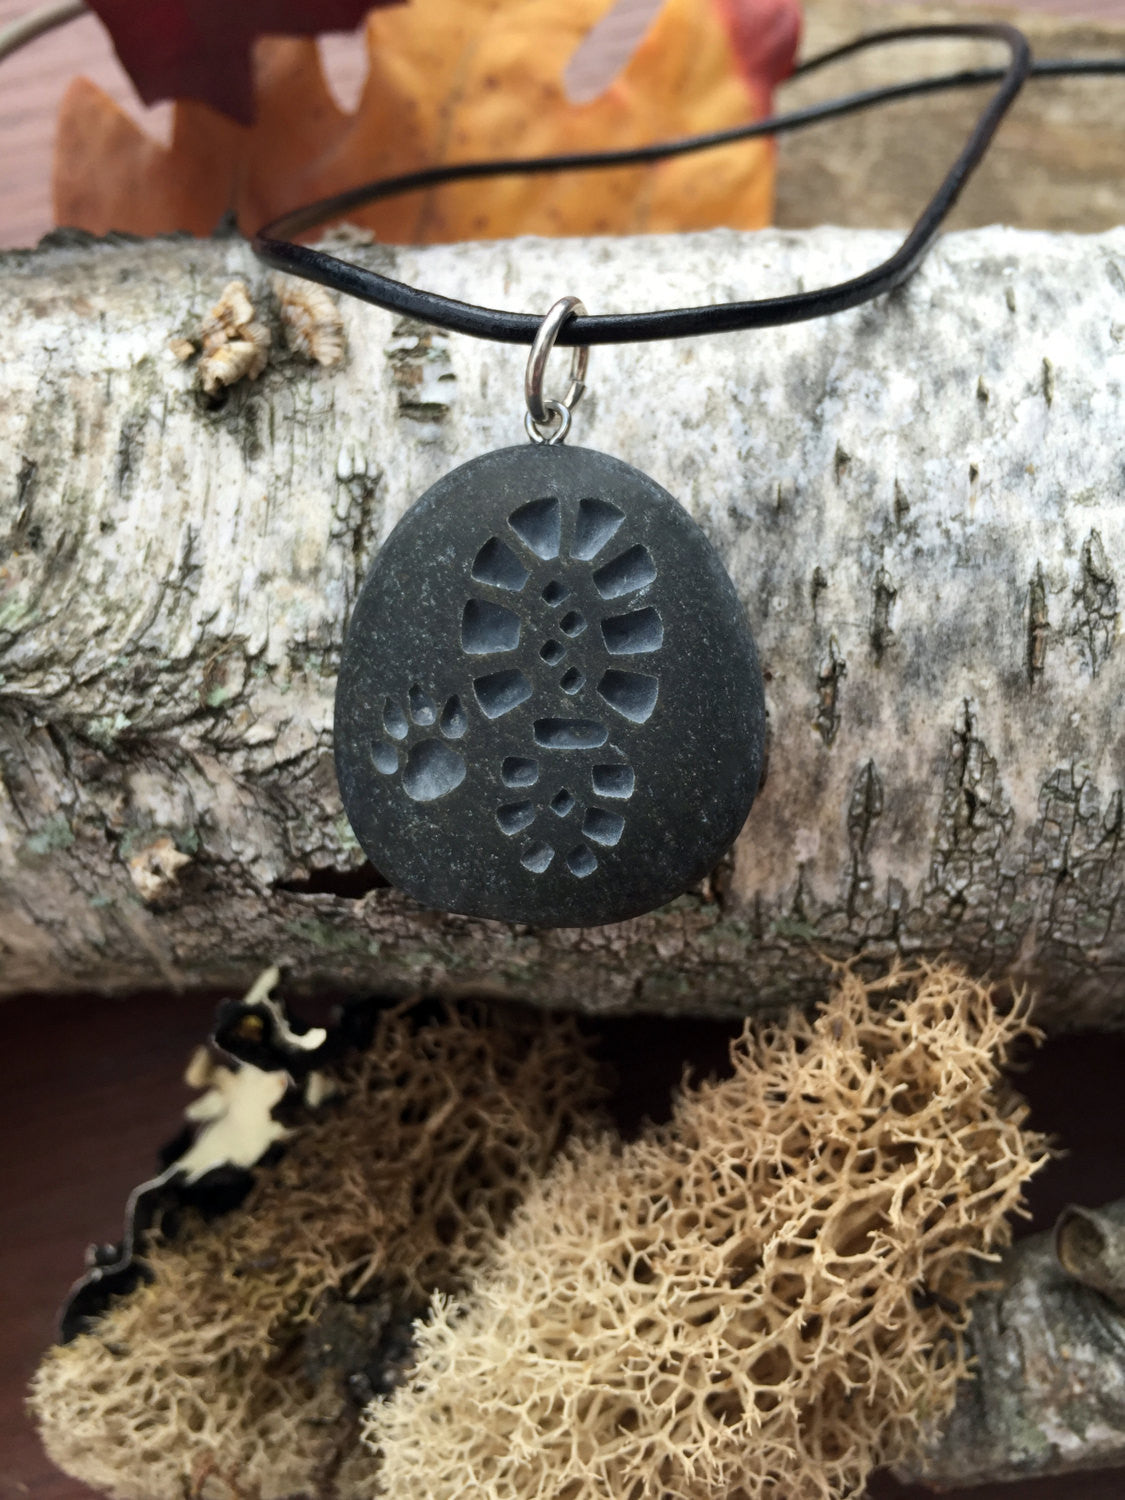 Hiking Boot and Dog Paw - Forever Adventuring Friends - Engraved Beach Stone Pendant Jewelry - Cast a Stone